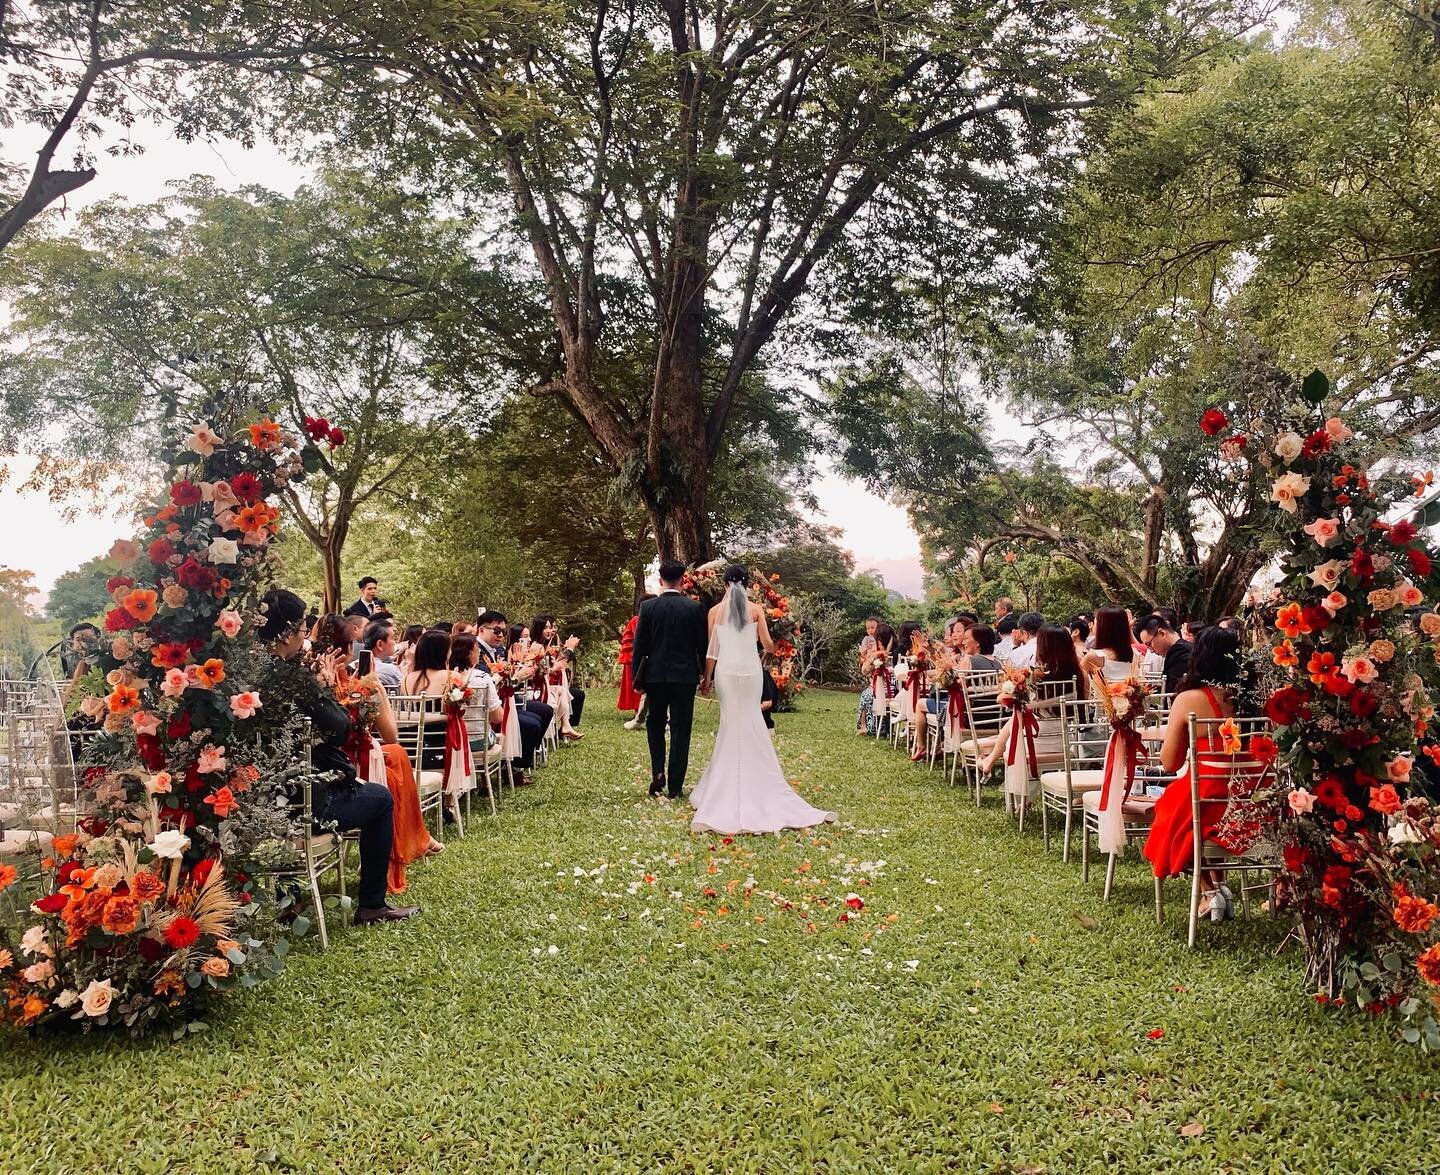 &bull; Warren &amp; HongYee &bull; 

Looking for autumn wedding colours with some serious impact? Styled with lush greenery, colorful florals, quotes acrylic and pleated pedestal to match. This stunning garden wedding has officially captured our hear